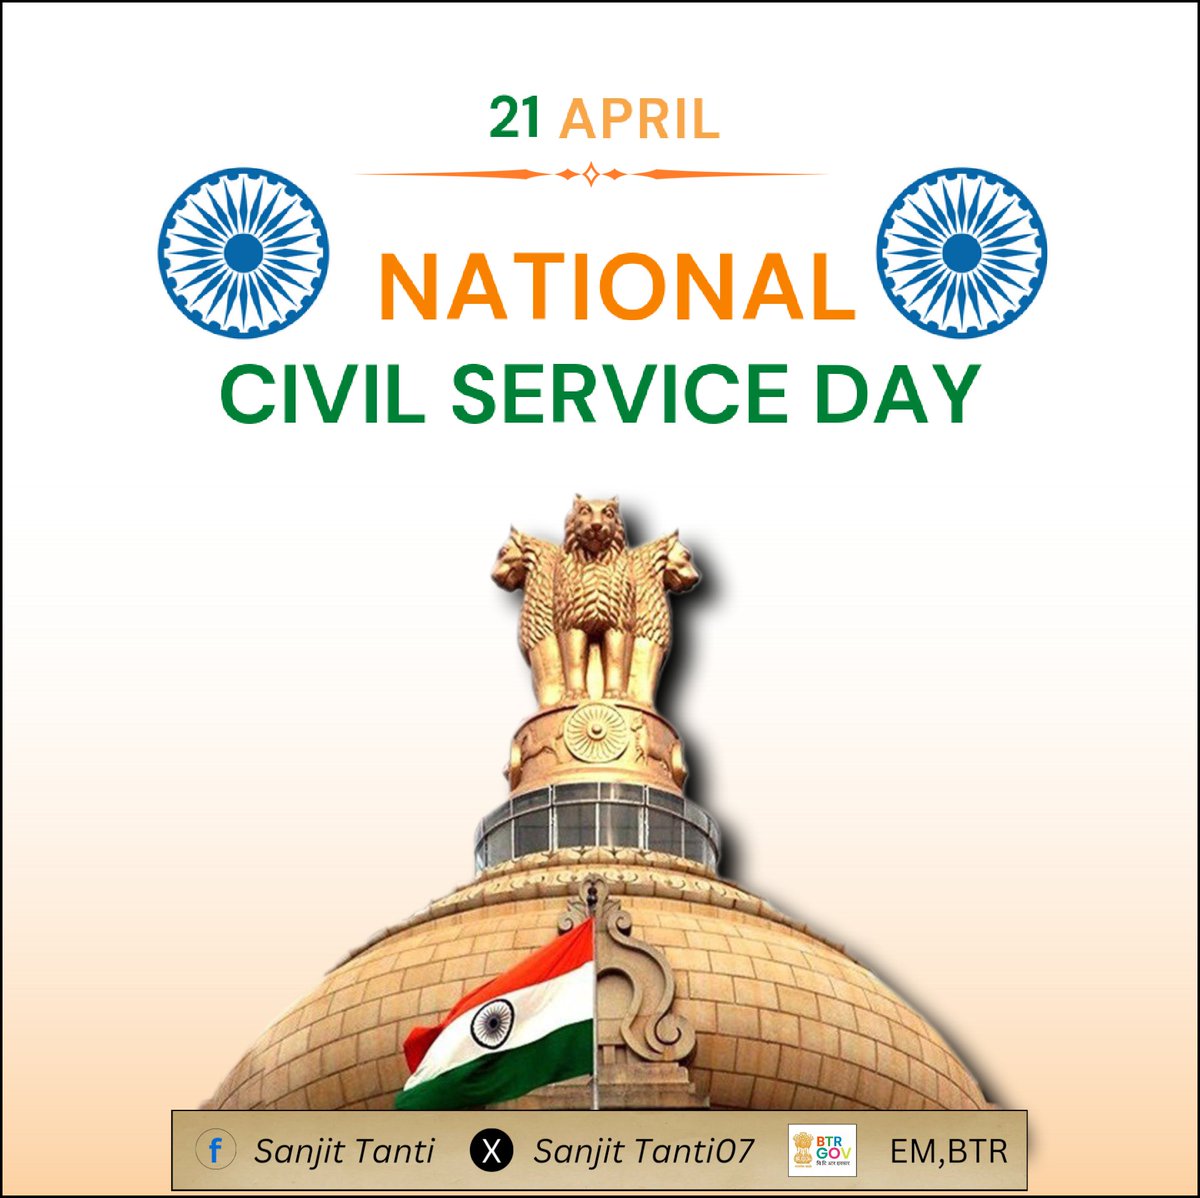 My greetings to all the Civil Service Officers on this National Civil Service Day,who work so hard for the welfare of India.Hats off to their dedication,commitment and professionalism. #NationalCivilServiceDay